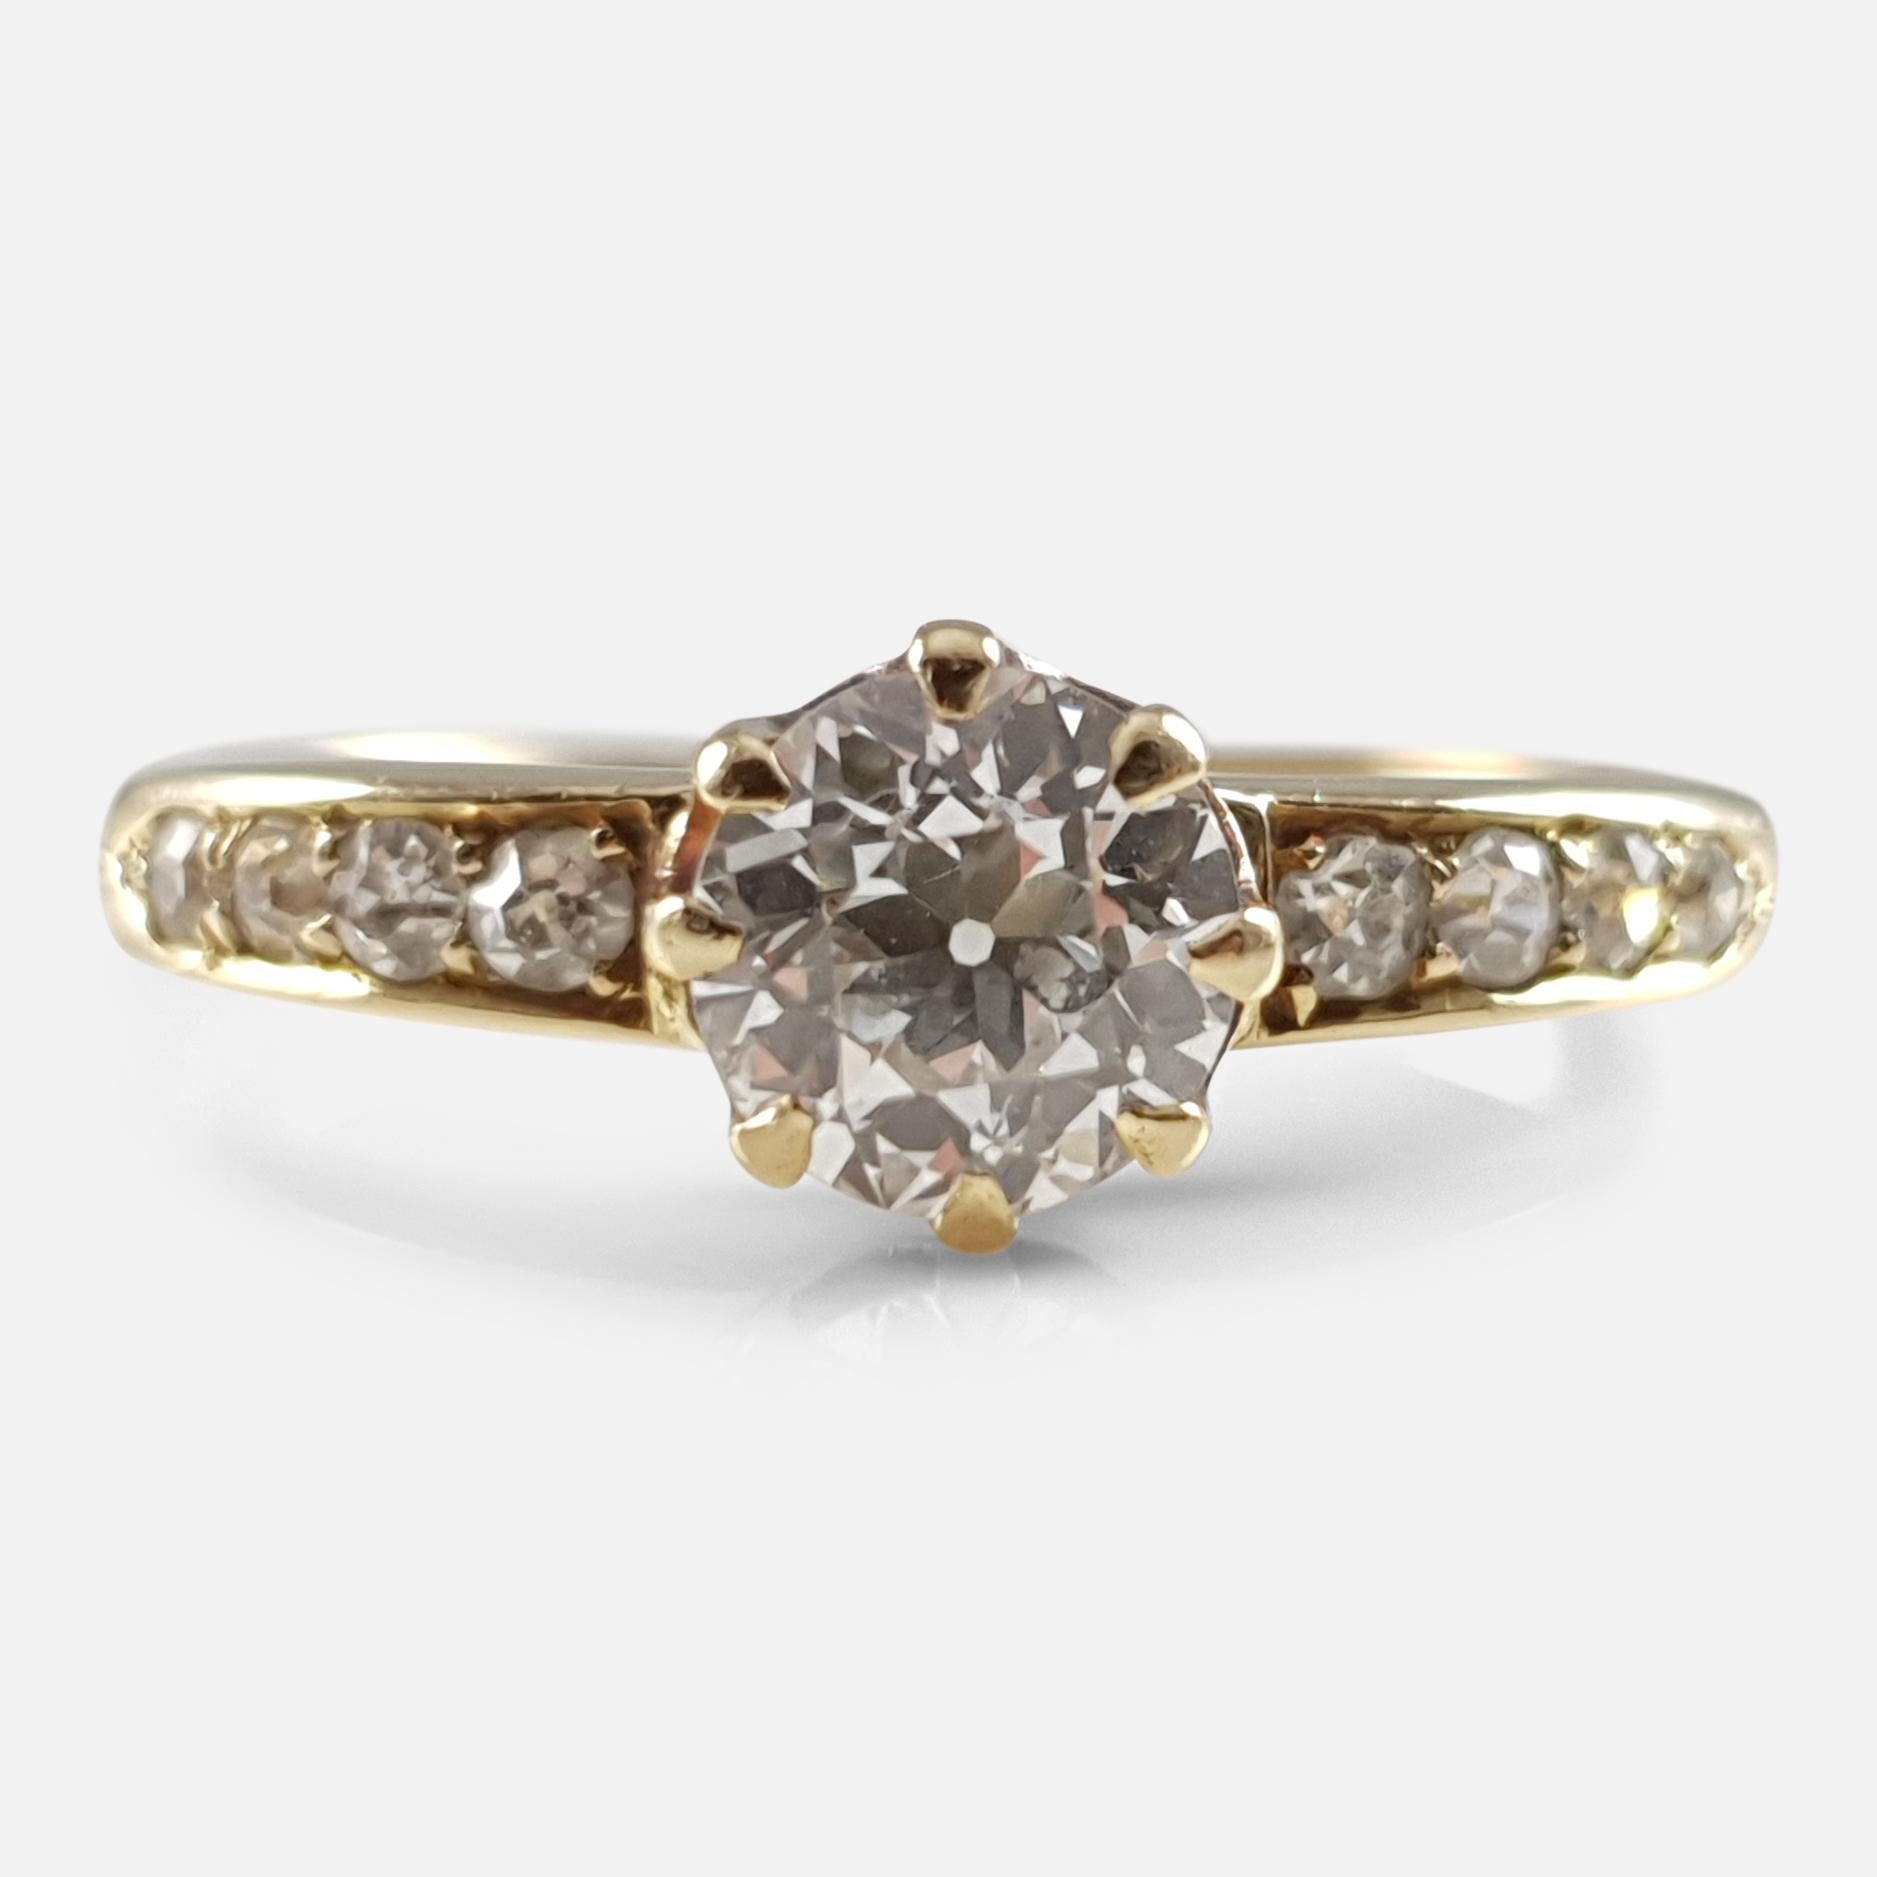 An early 20th century 18 karat yellow gold 0.90cts diamond ring. The principle old cut diamond weighs 0.75cts with the further old cut diamonds to the shoulders having a total weight of approximately 0.15cts. As was common for the period the ring is